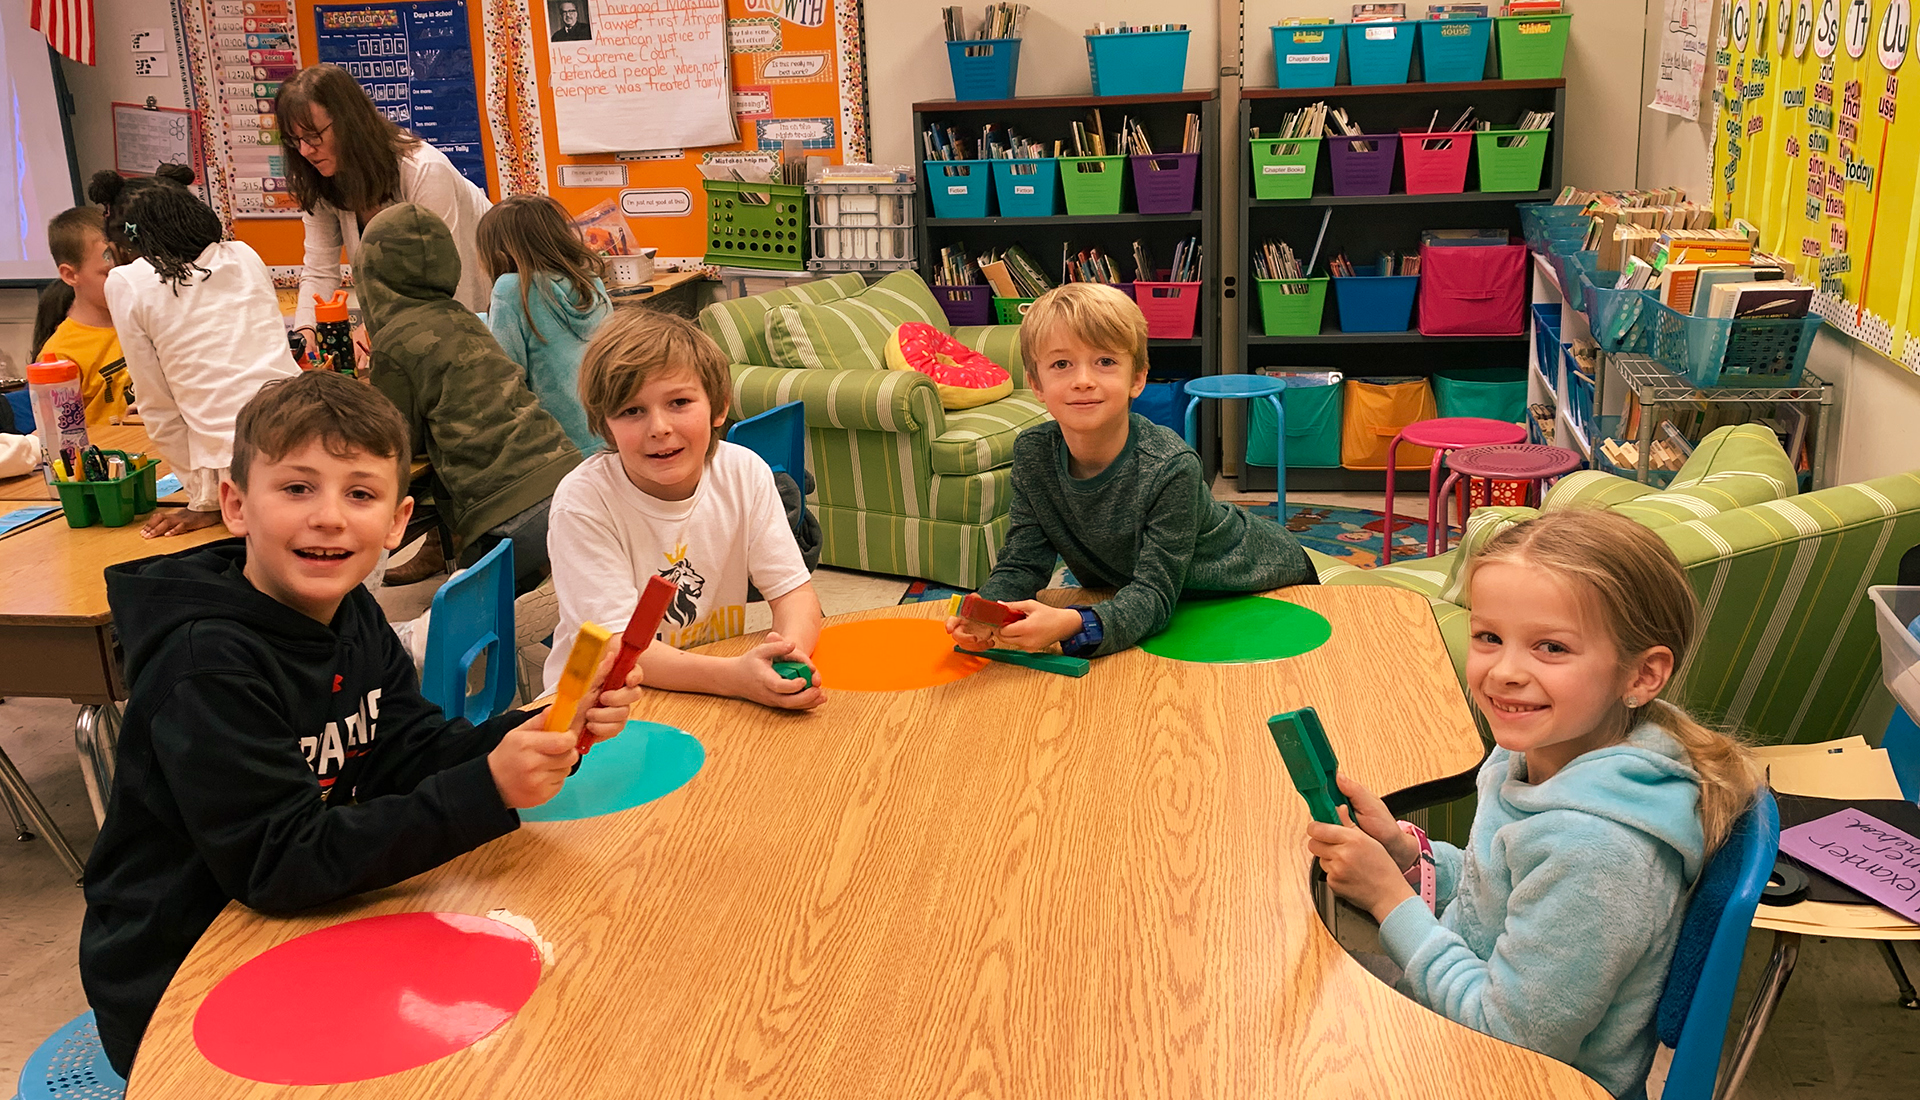 Second graders sitting together at a table in class